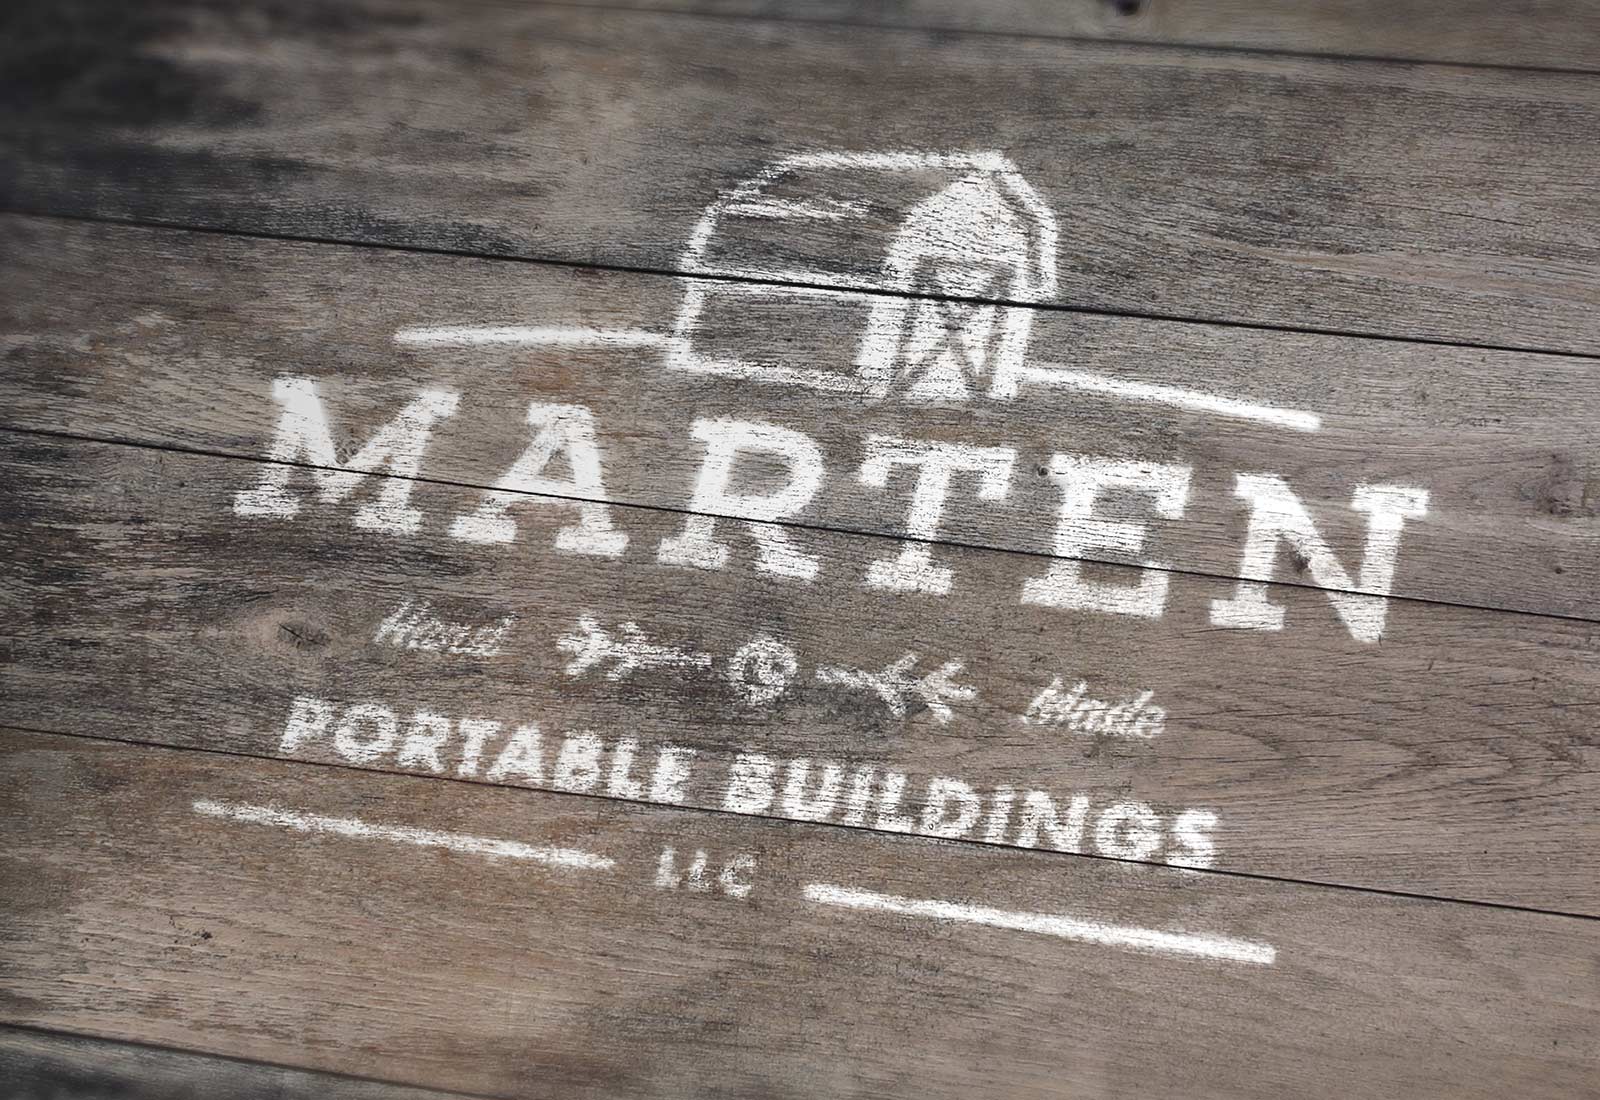 Marten Portable Buildings Logo Painted On Wood